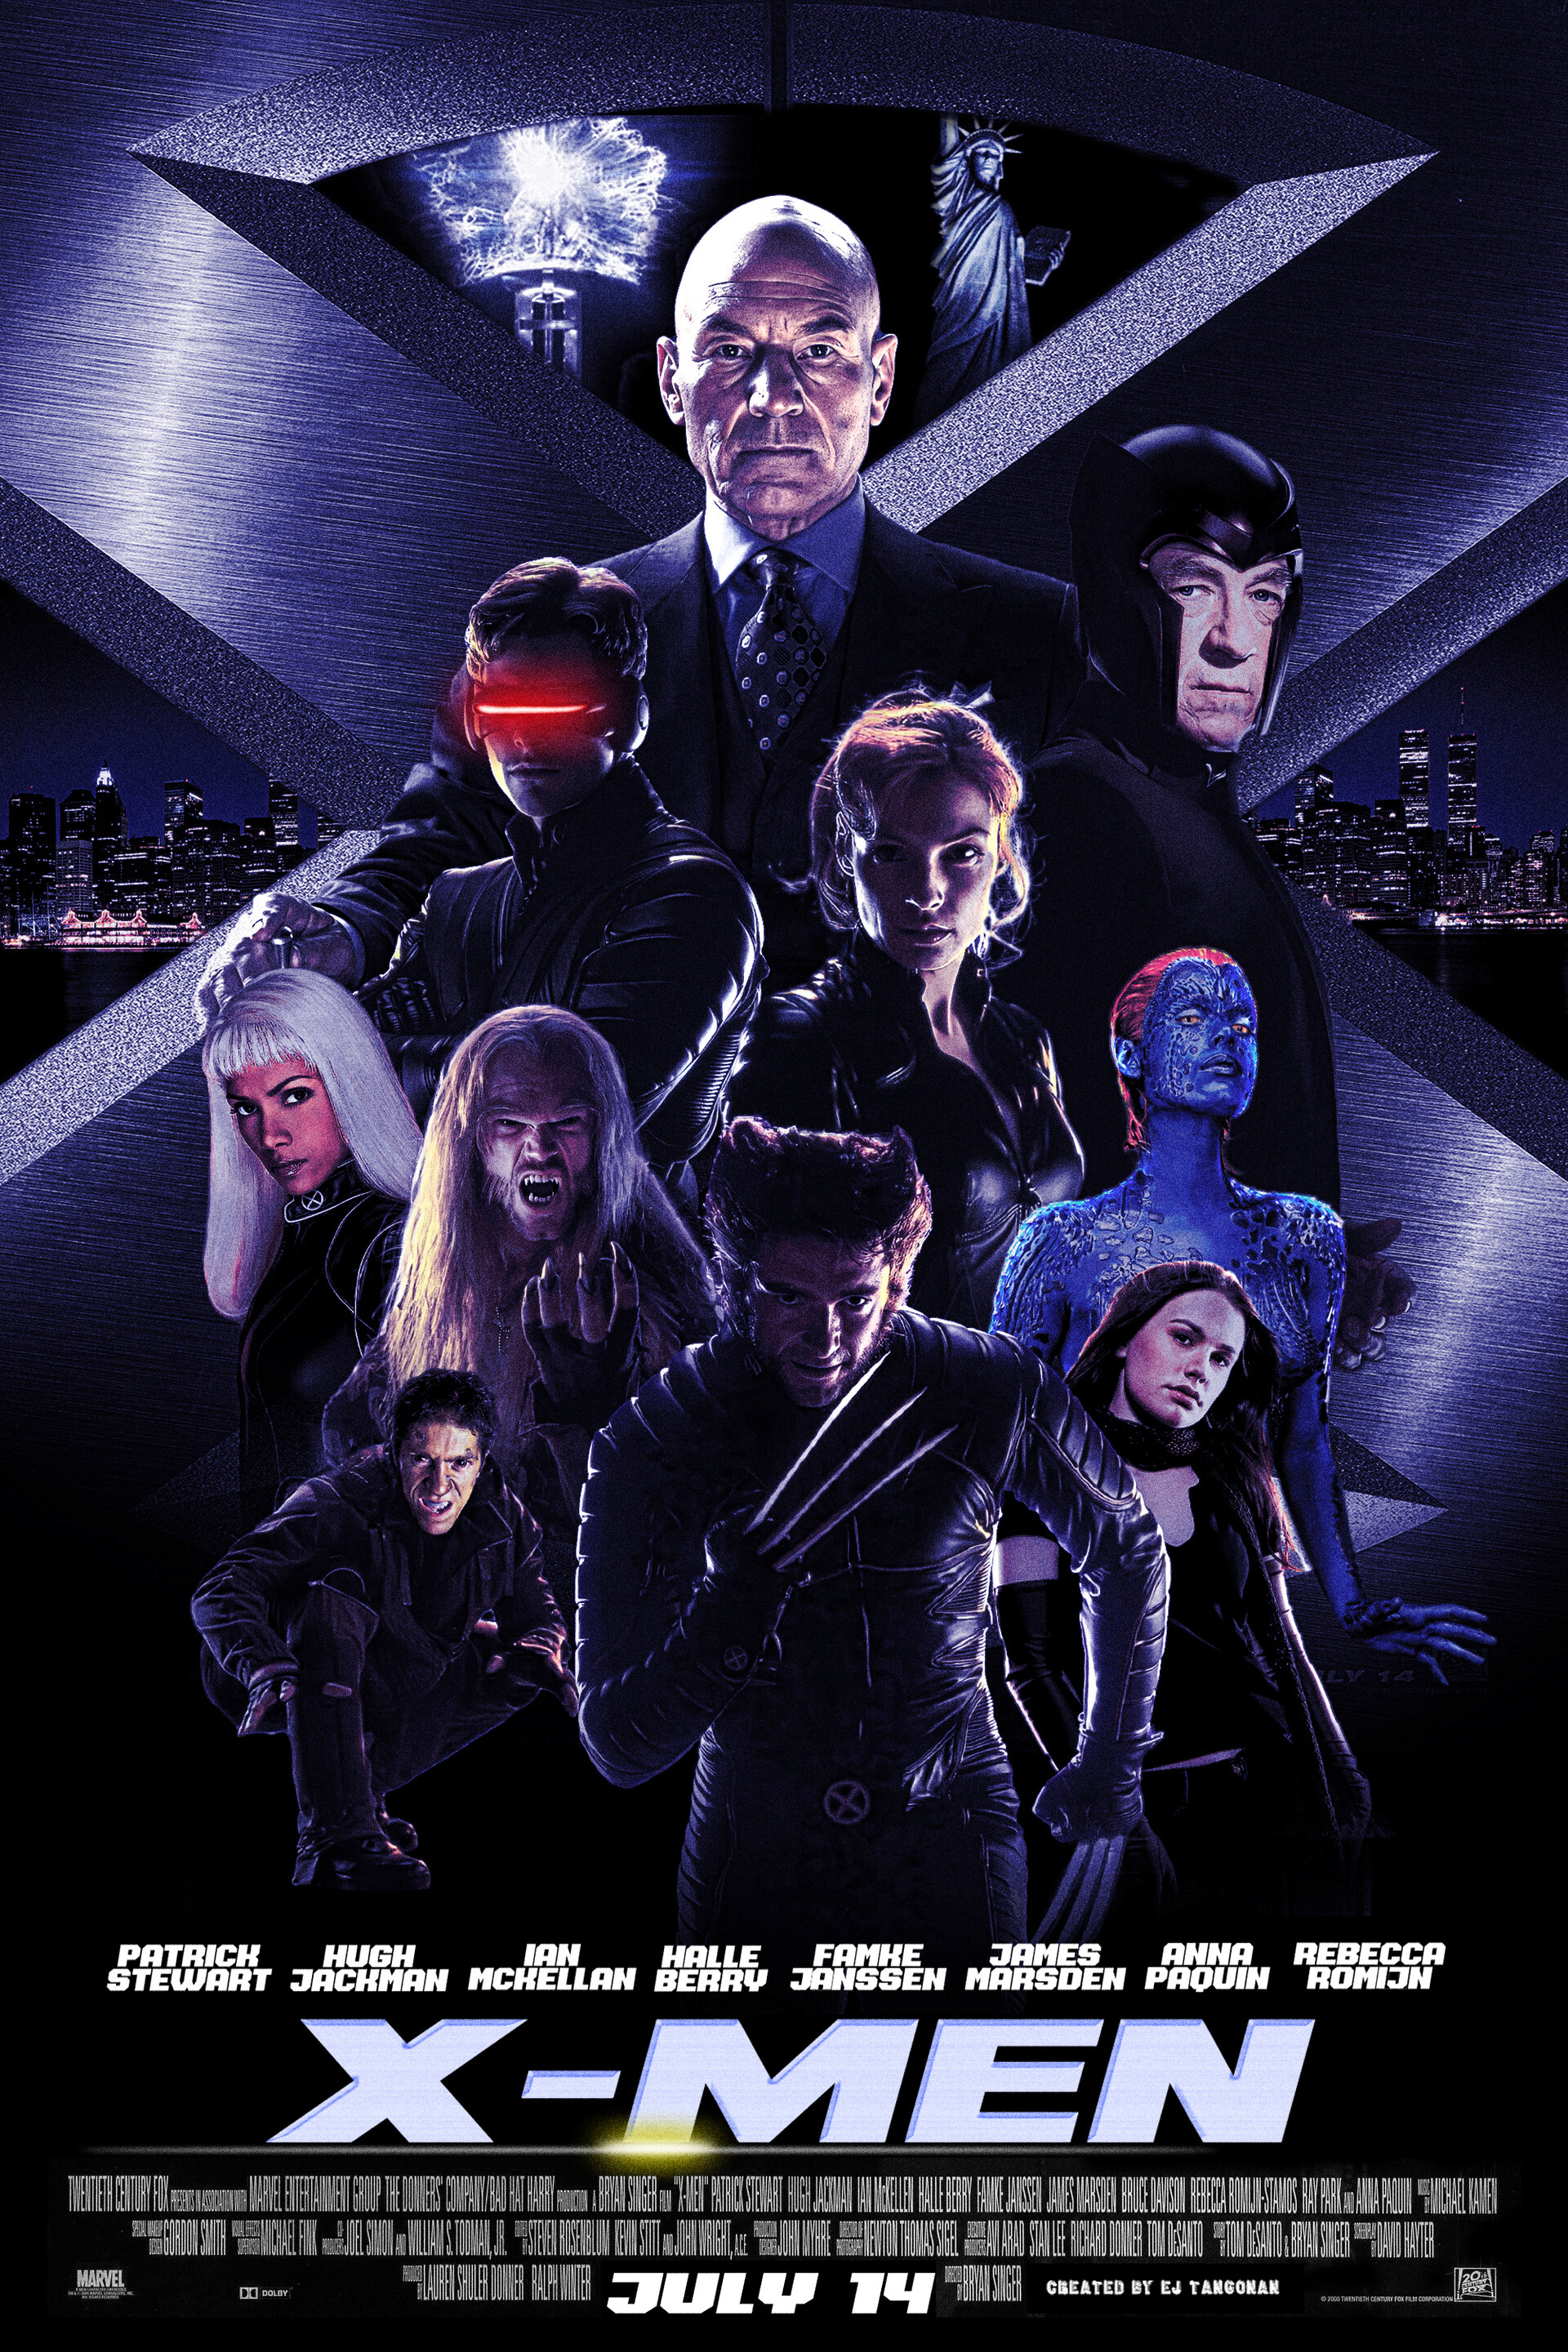 x men days of future past rogue poster